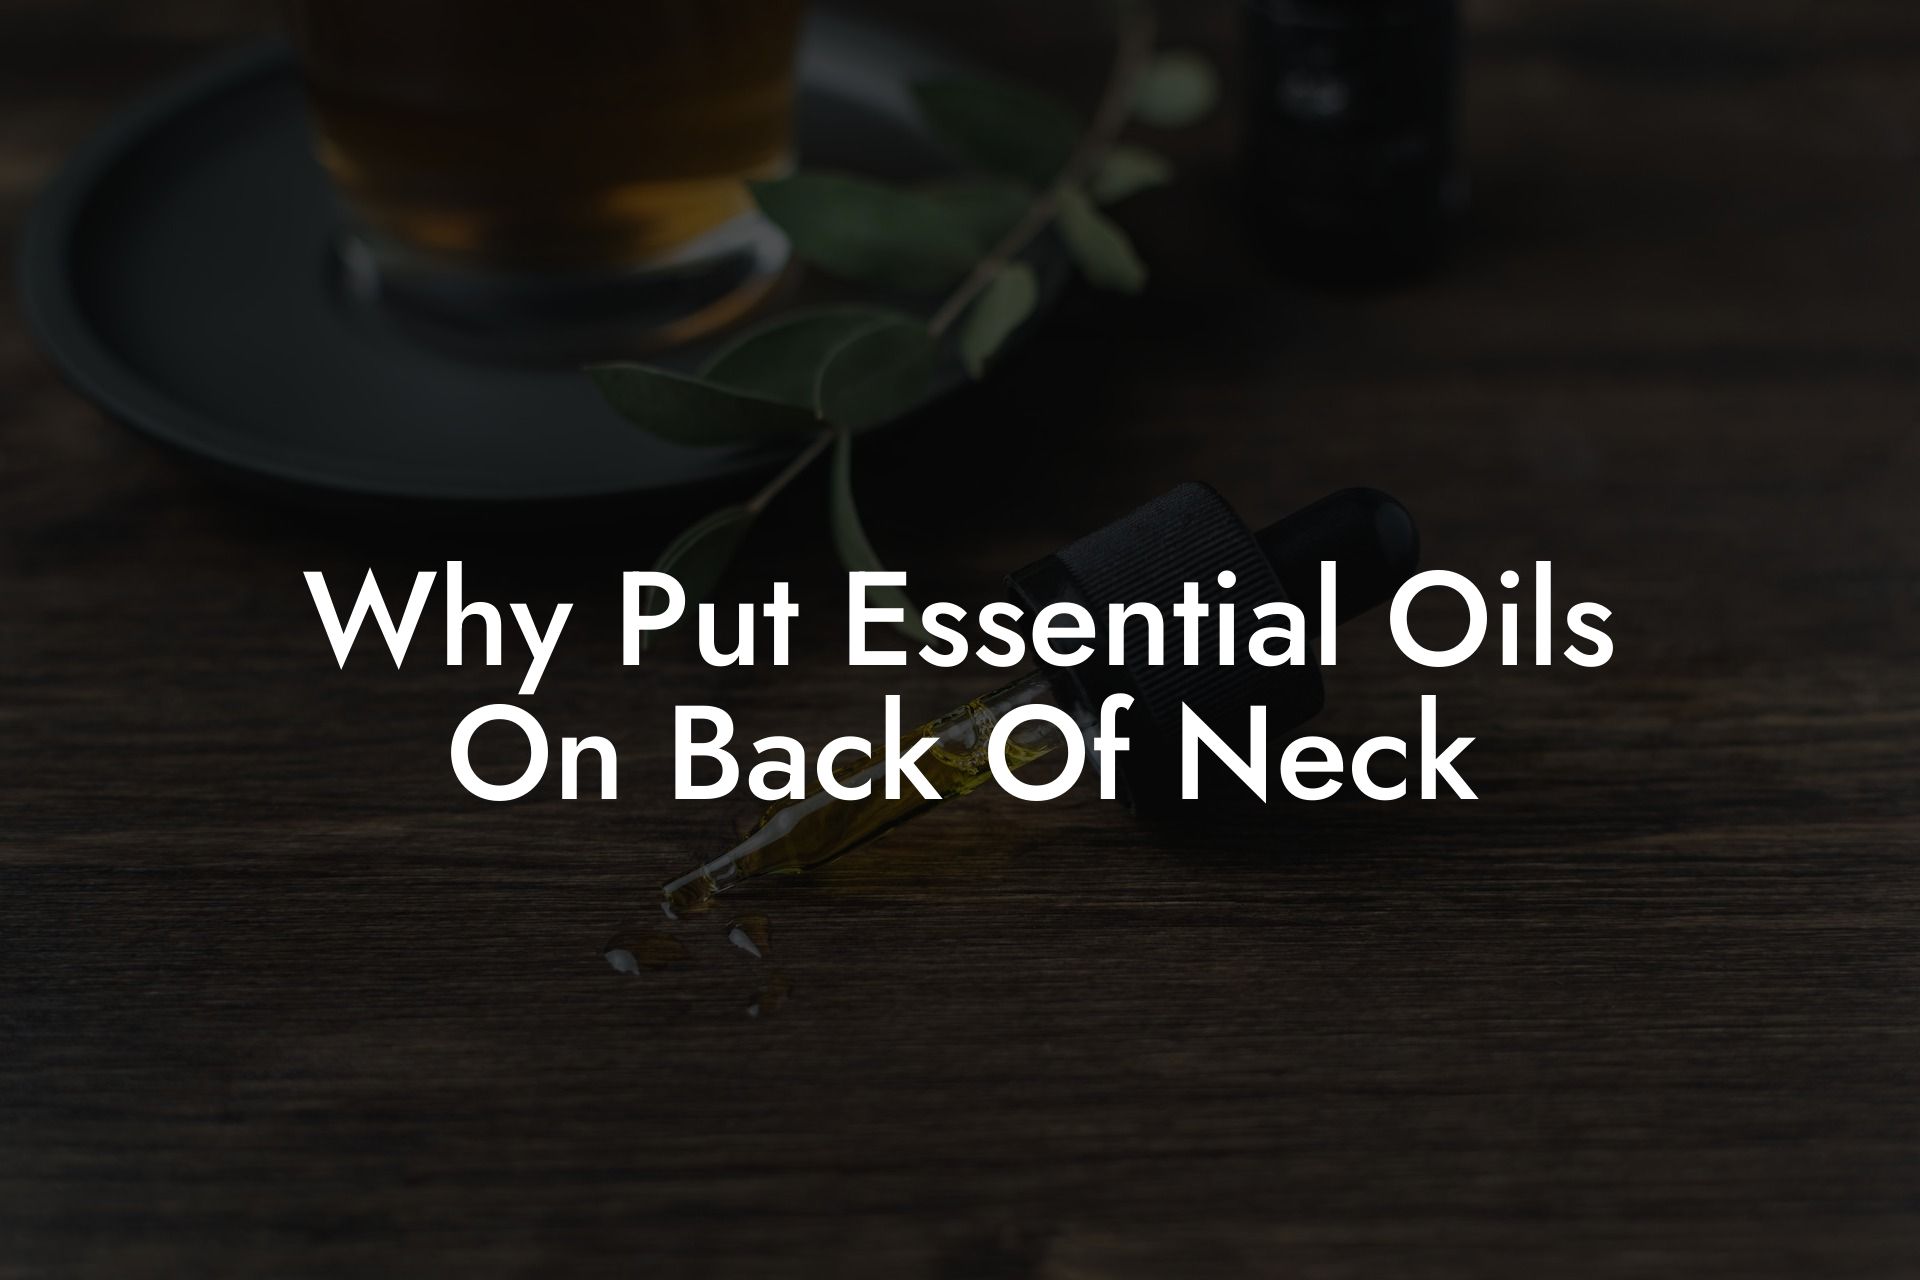 Why Put Essential Oils On Back Of Neck